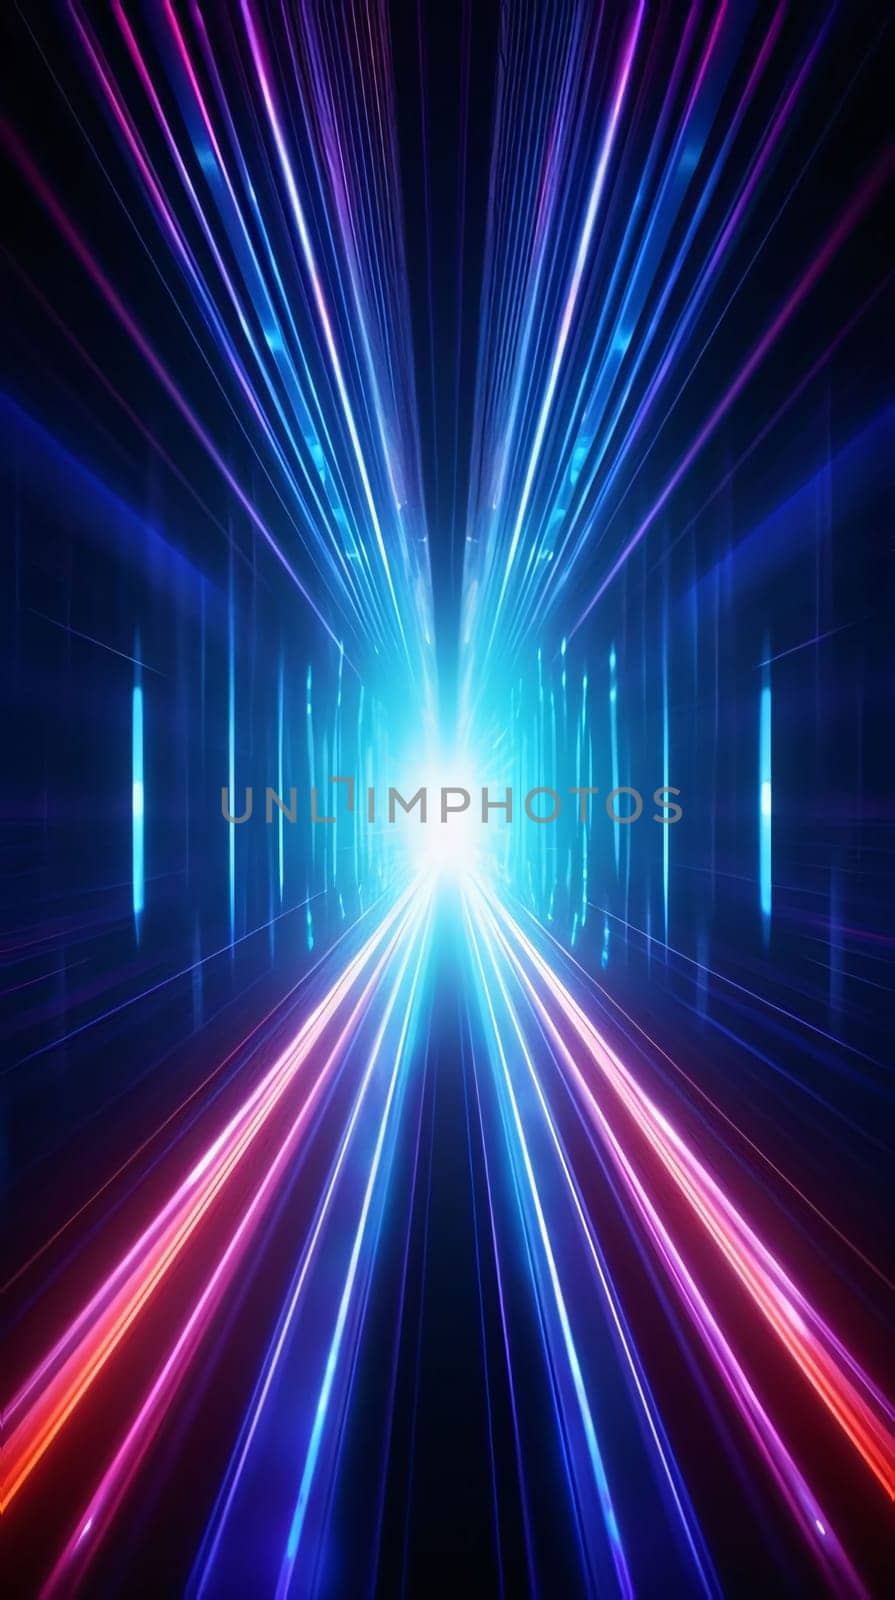 Abstract background design: Futuristic technology background with glowing lines and light effects. Vector illustration.